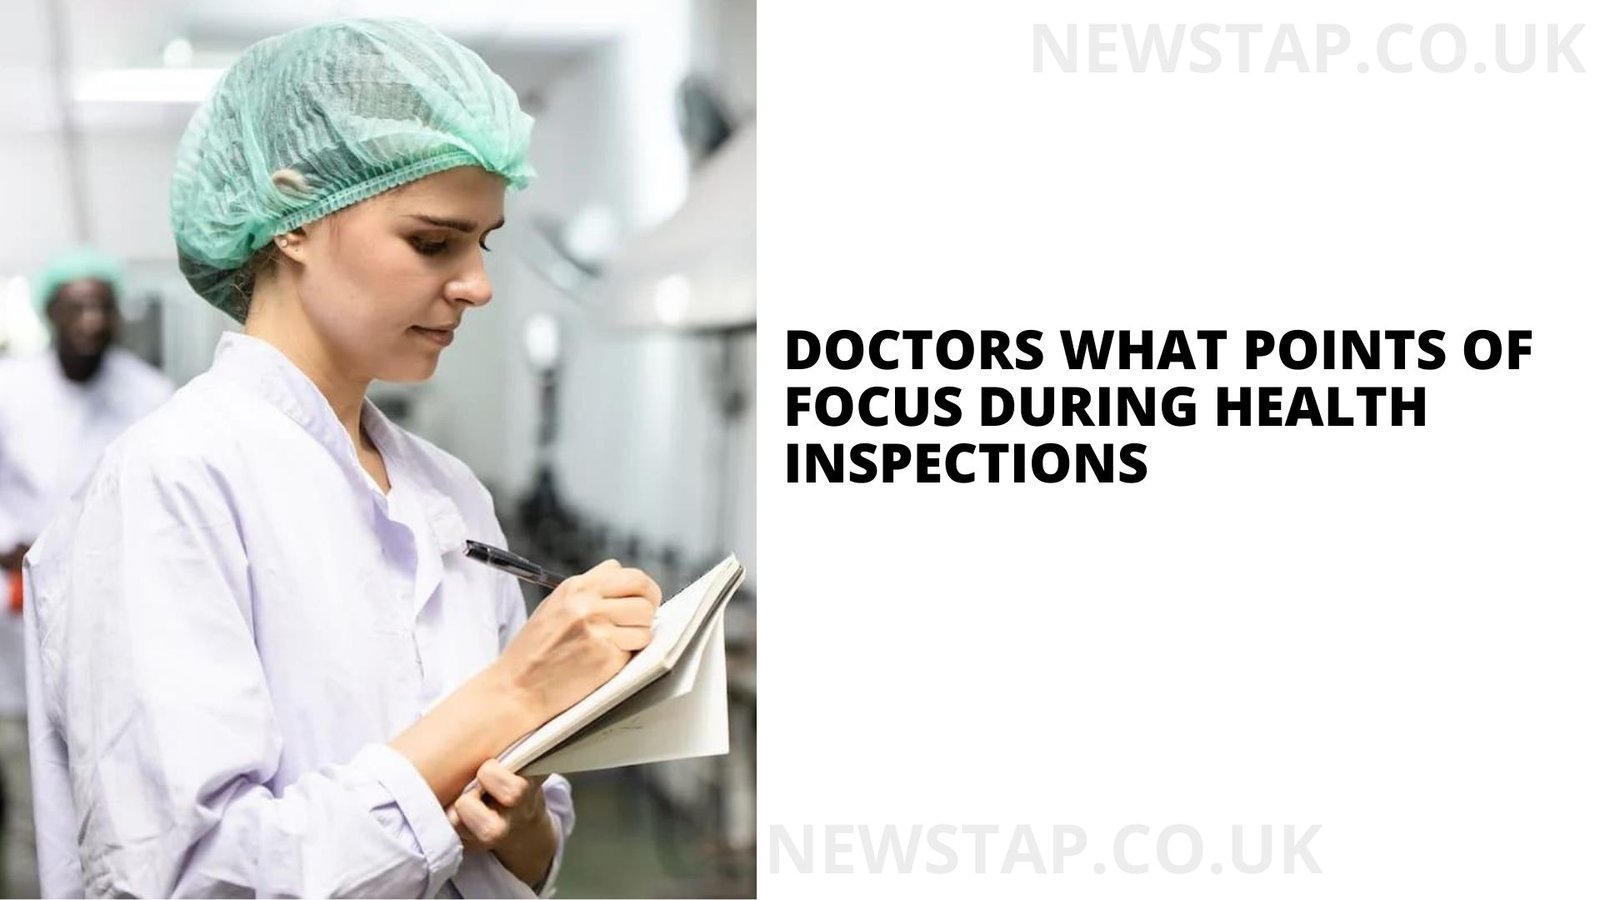 Doctor's What is a Points of Focus During Health Inspections - newstap.co.uk